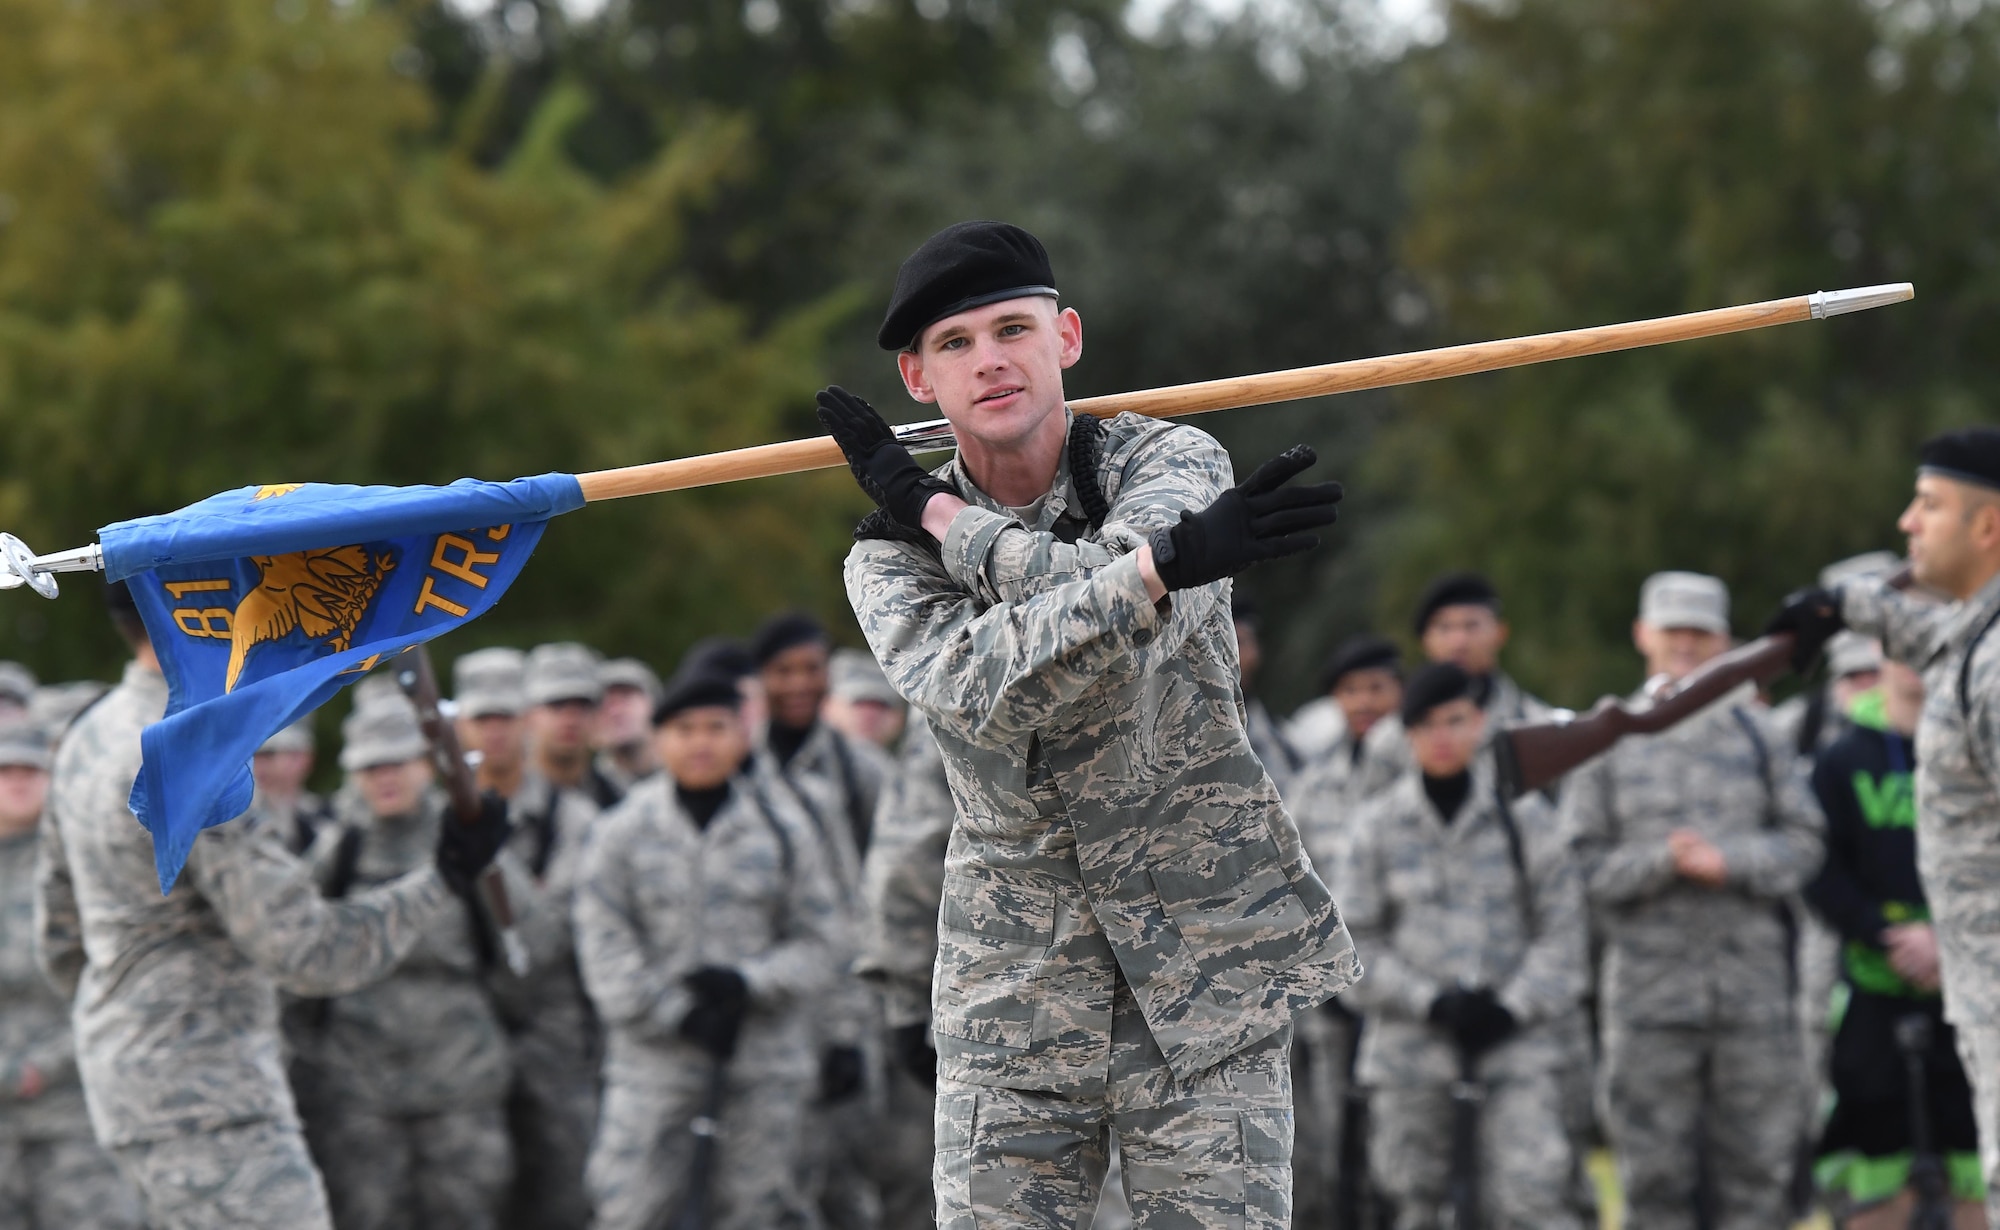 U.S. Air Force Airman Kory King, 338th Training Squadron freestyle drill team member, performs during the 81st Training Group drill down on the Levitow Training Support Facility drill pad at Keesler Air Force Base, Mississippi, Nov. 2, 2018. The 338th TRS "Dark Knights" took first place in the freestyle competition. (U.S. Air Force photo by Kemberly Groue)